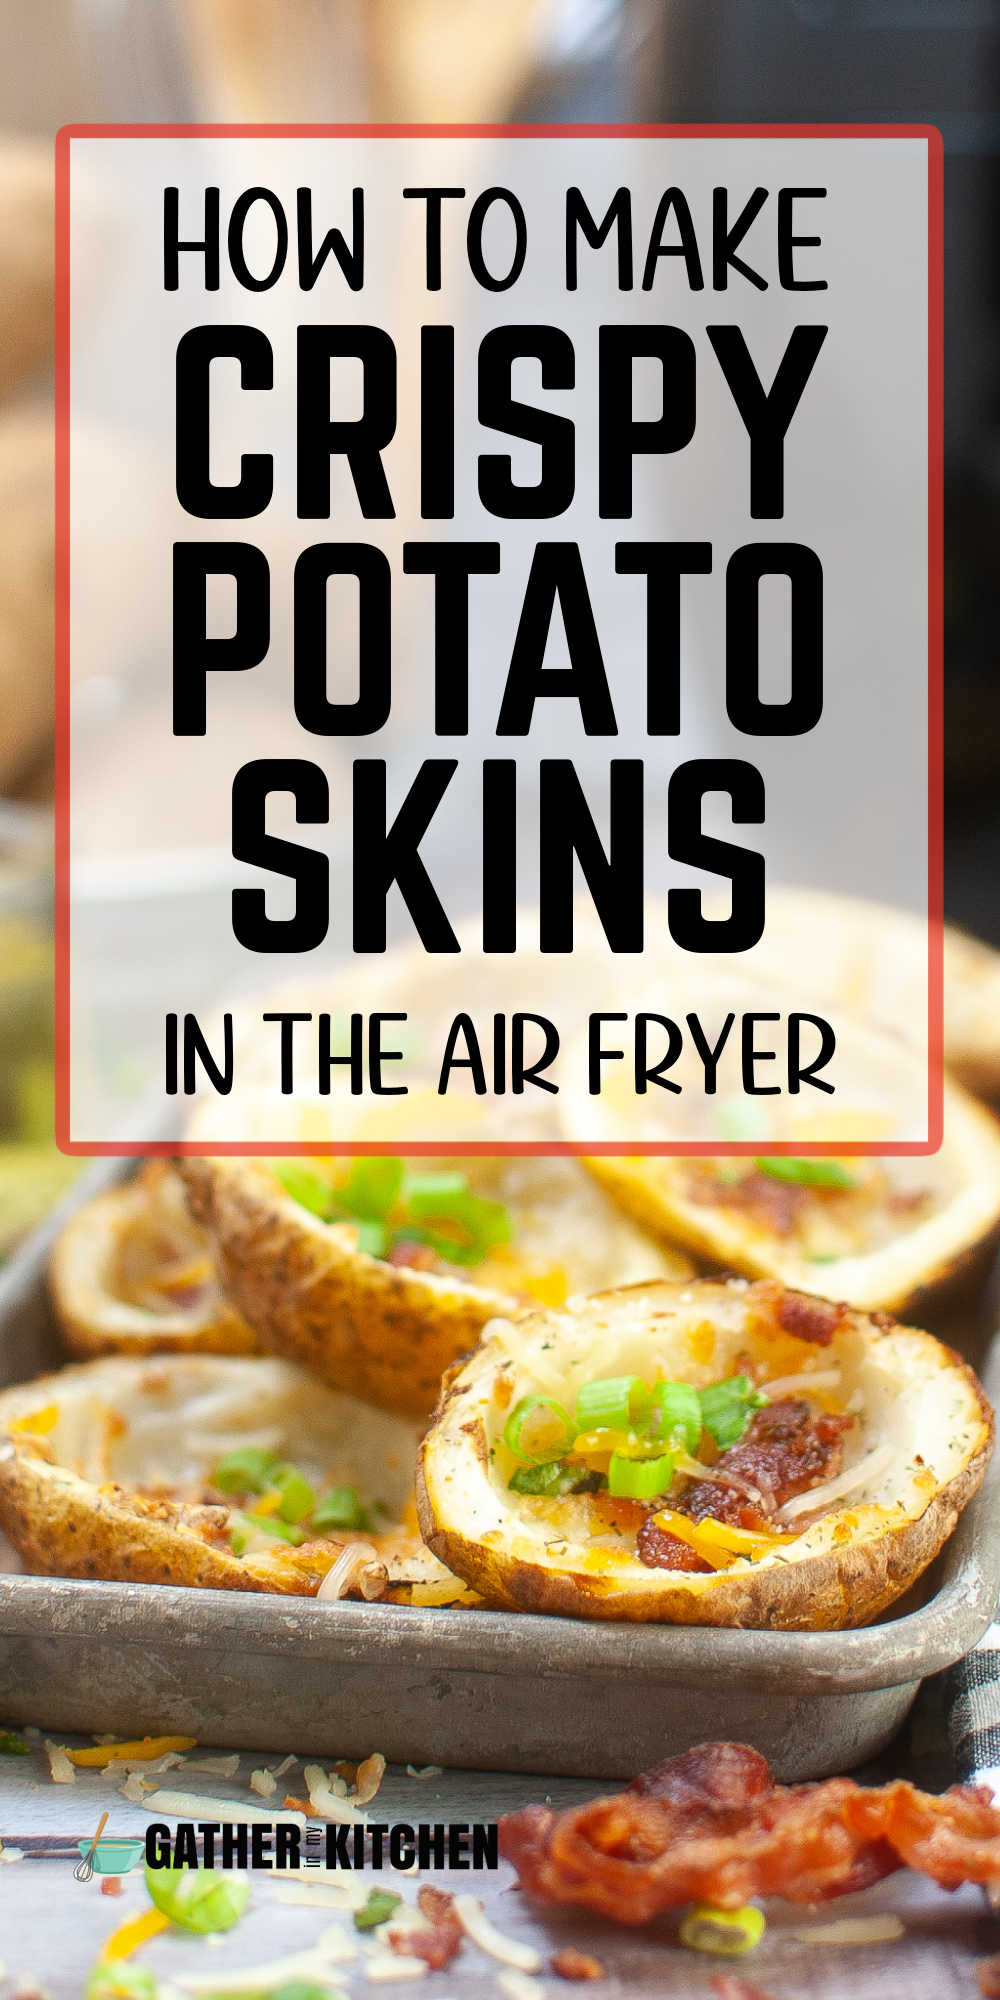 Pin image: potato skins with a box overlaid and the words "How to make crispy potato skins in the air fryer".